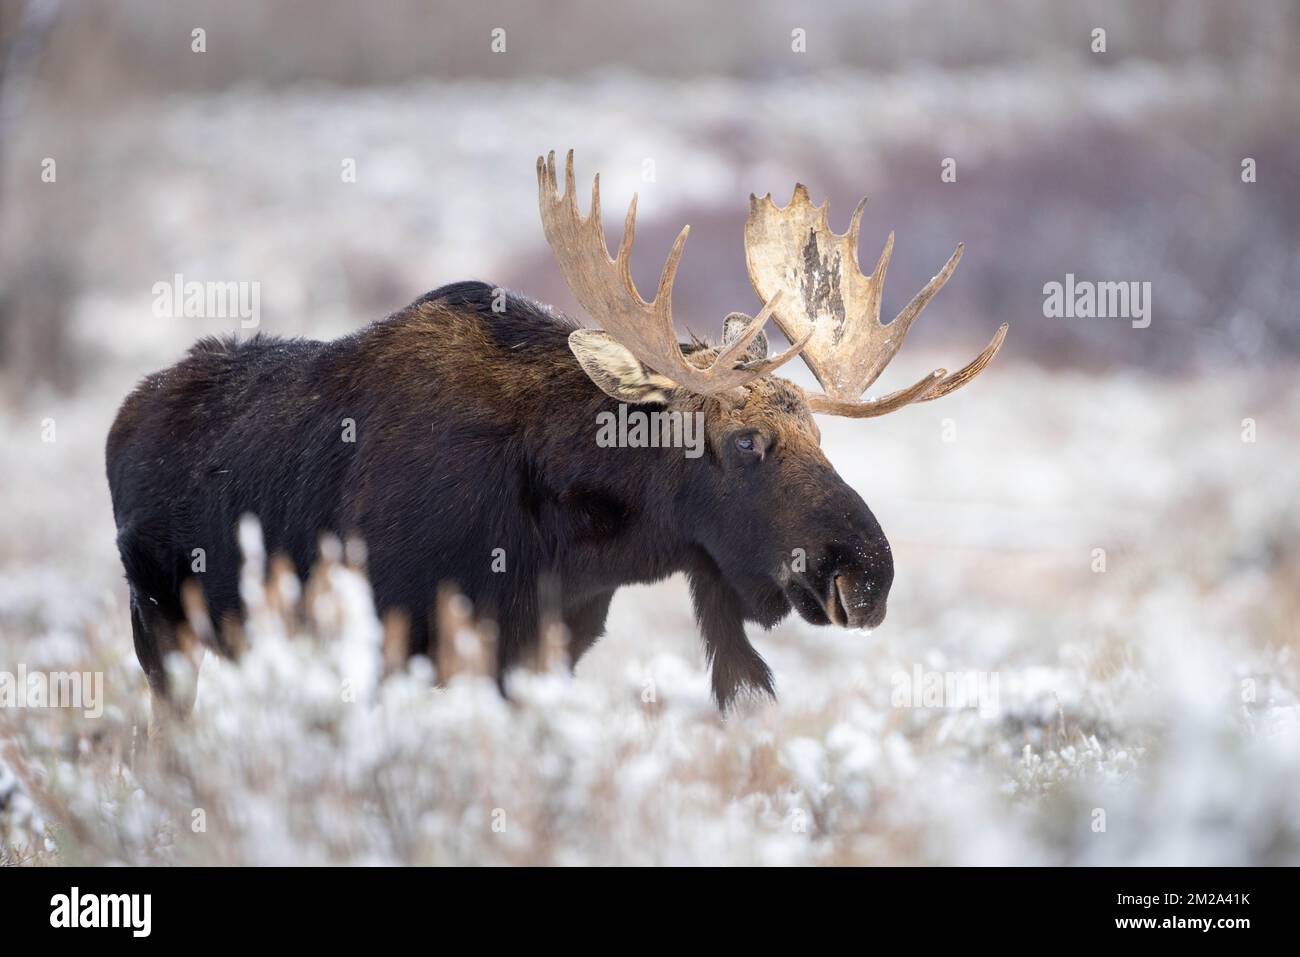 A large bull moose standing in a snowy landscape on Antelope Flats. Grand Teton National Park, Wyoming Stock Photo